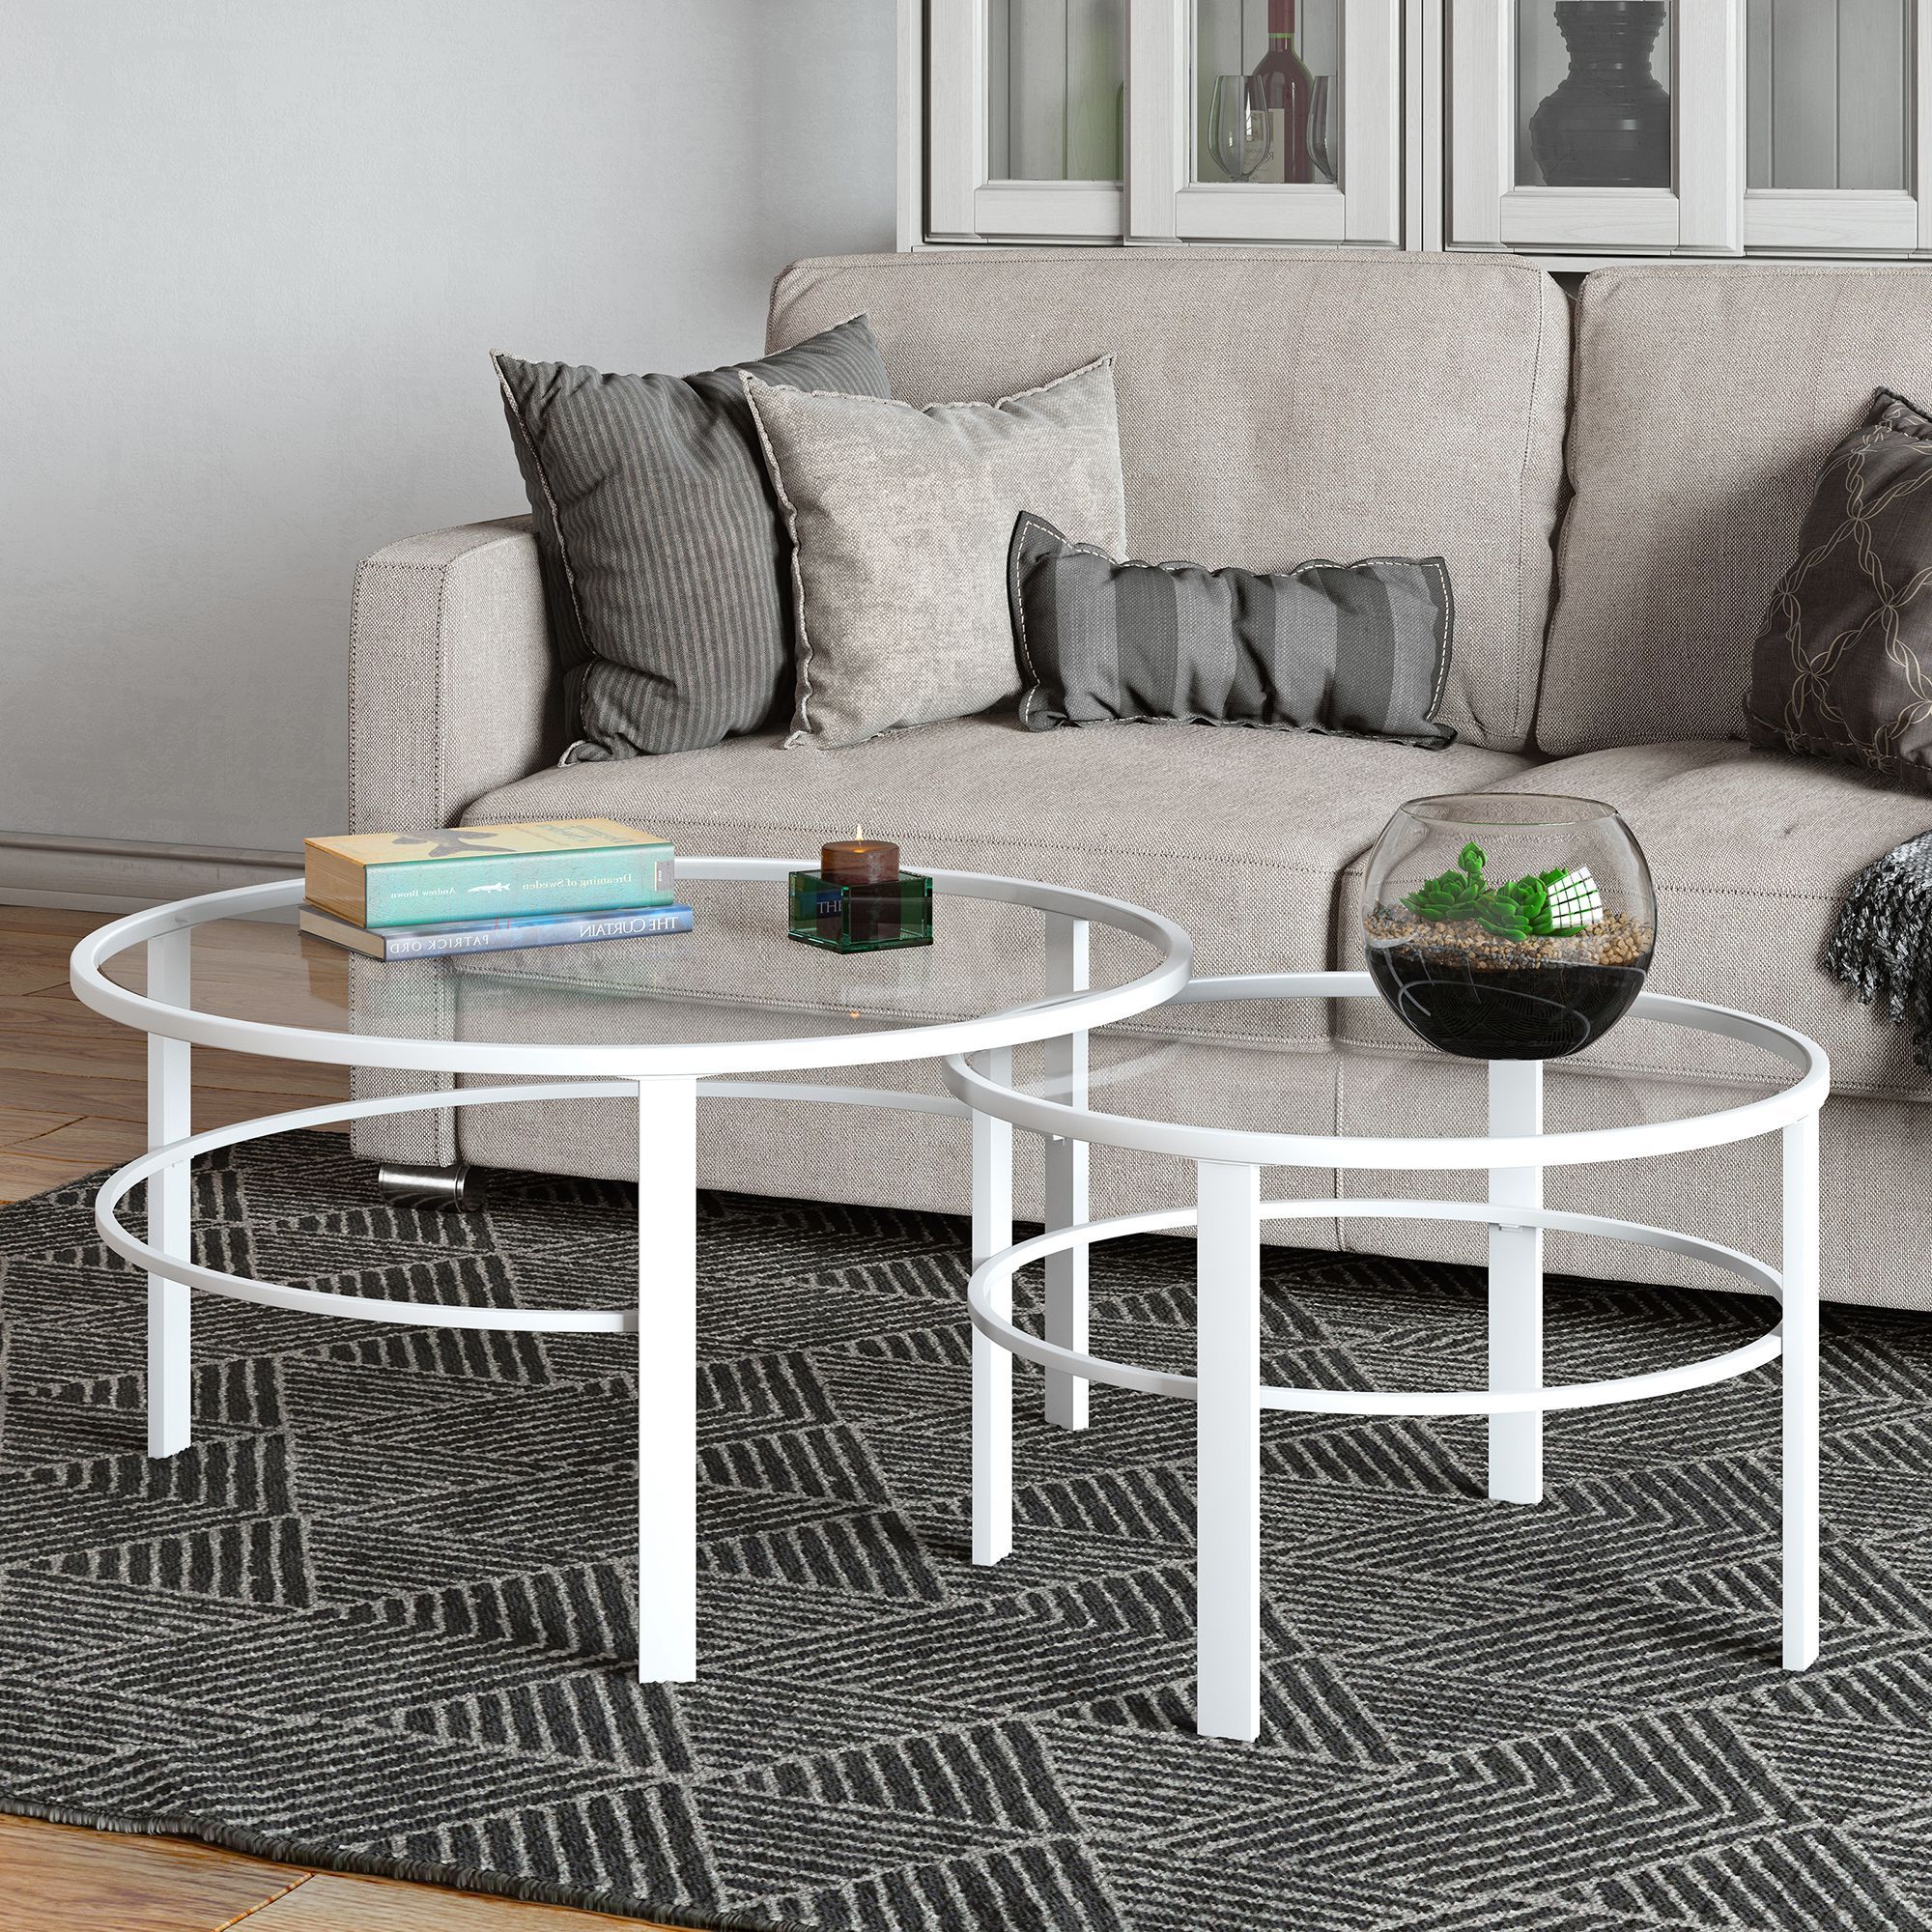 Geometric Glass Modern Coffee Tables Throughout Latest Evelyn&zoe Contemporary Nesting Coffee Table Set With Glass Top (View 6 of 10)